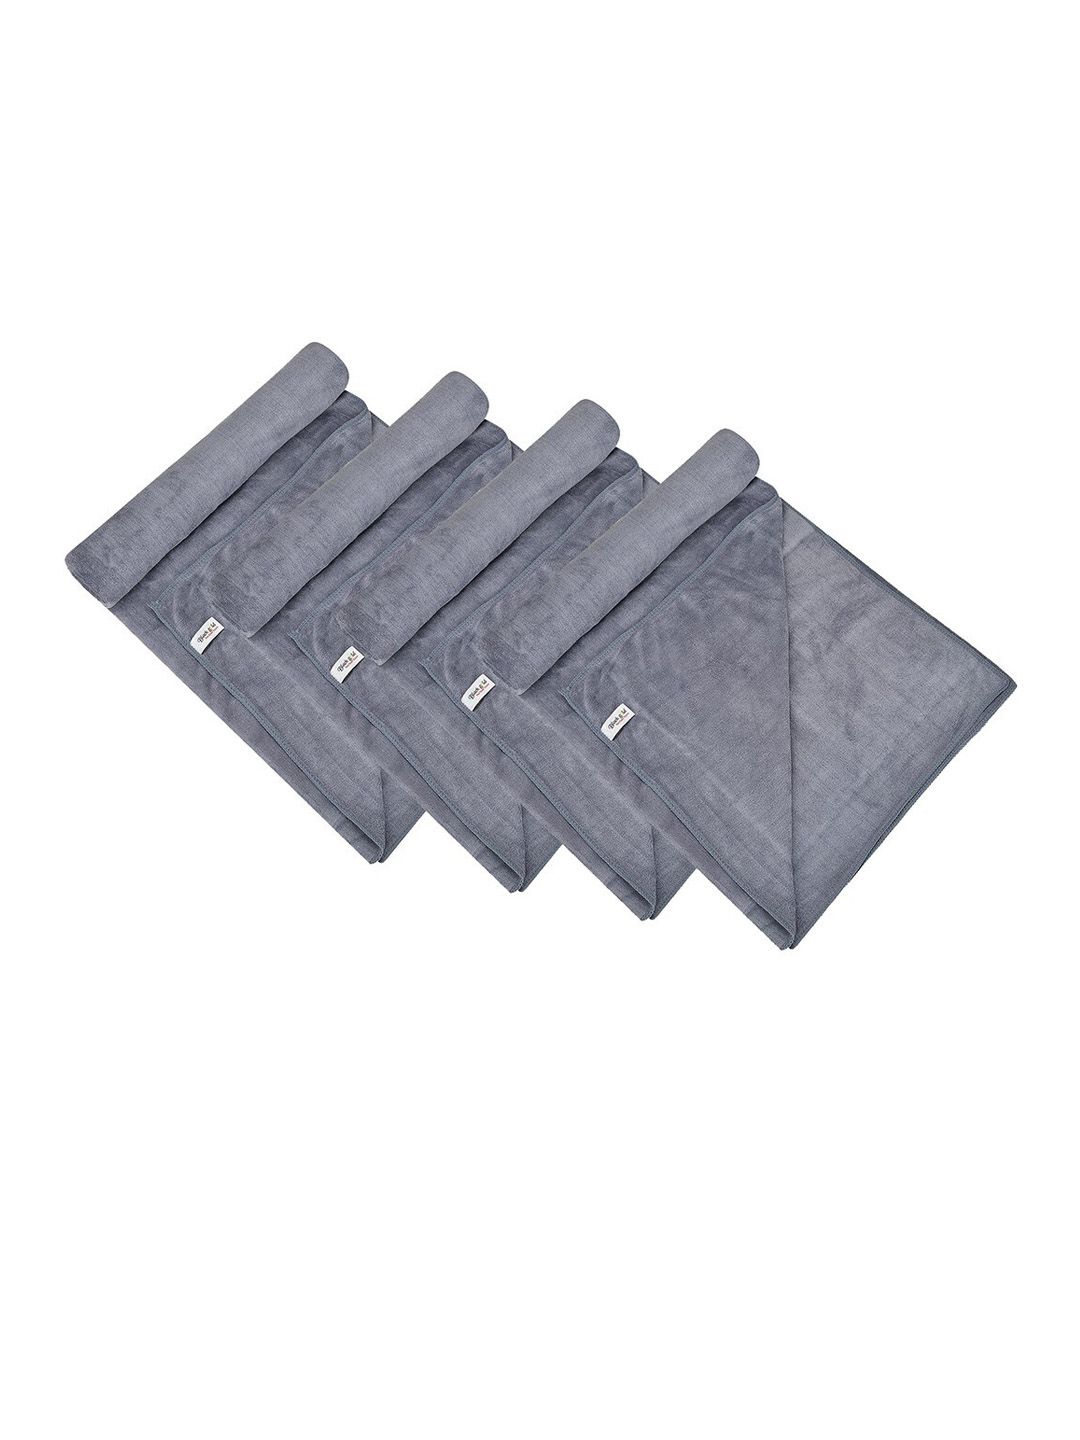 Black gold Set Of 4 Solid 400 GSM Microfiber Bath Towels Price in India